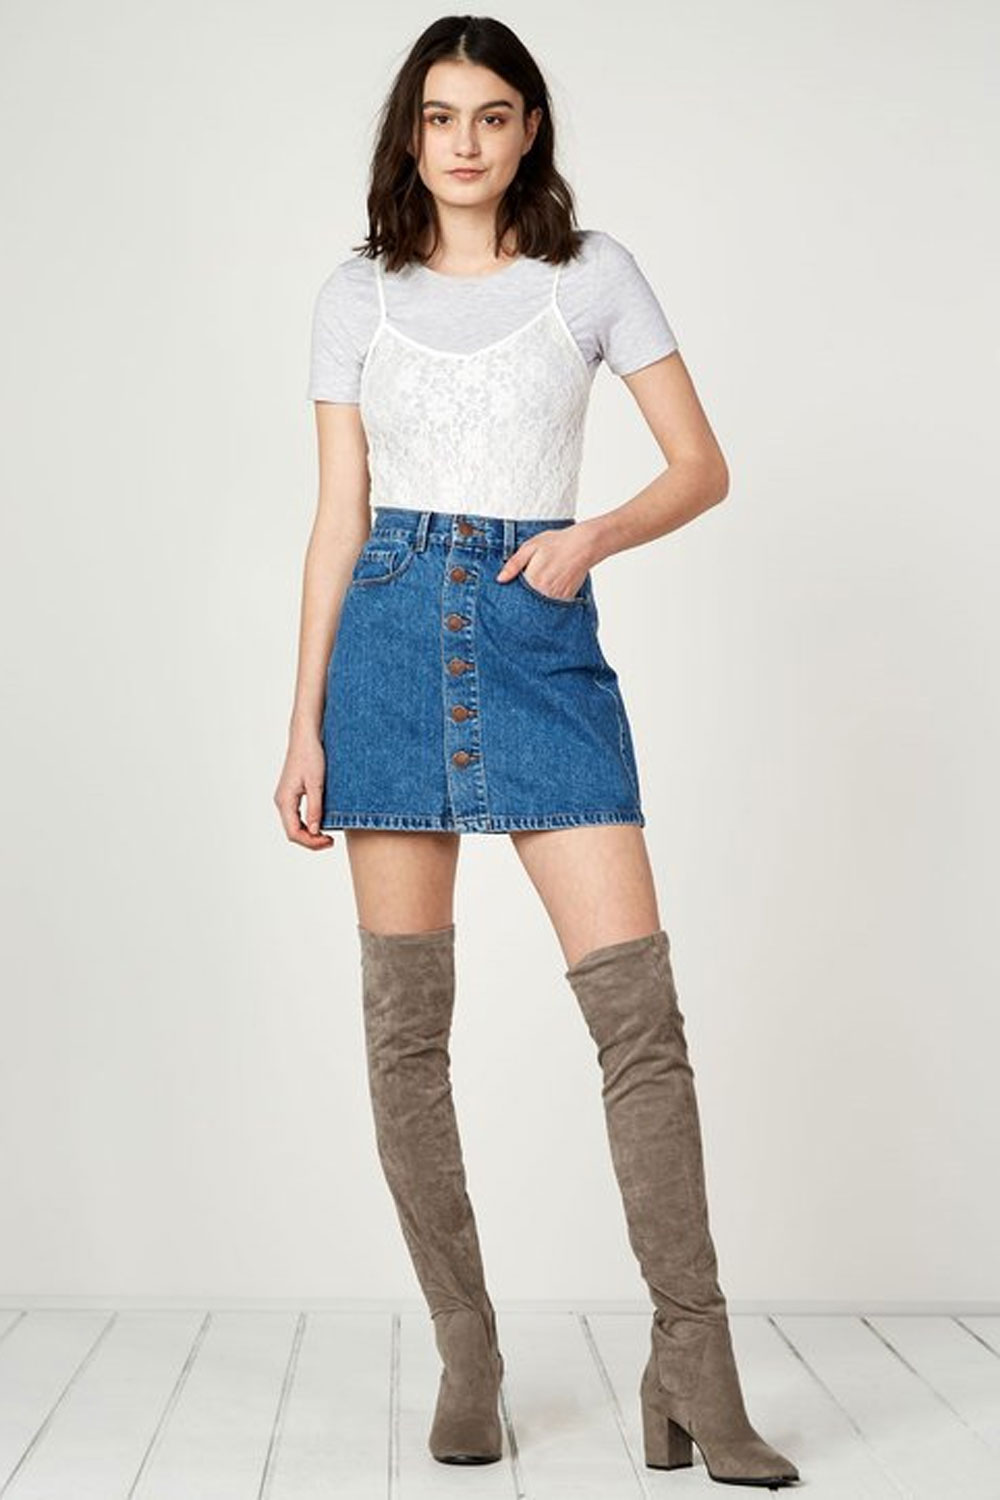 jean skirt with thigh high boots